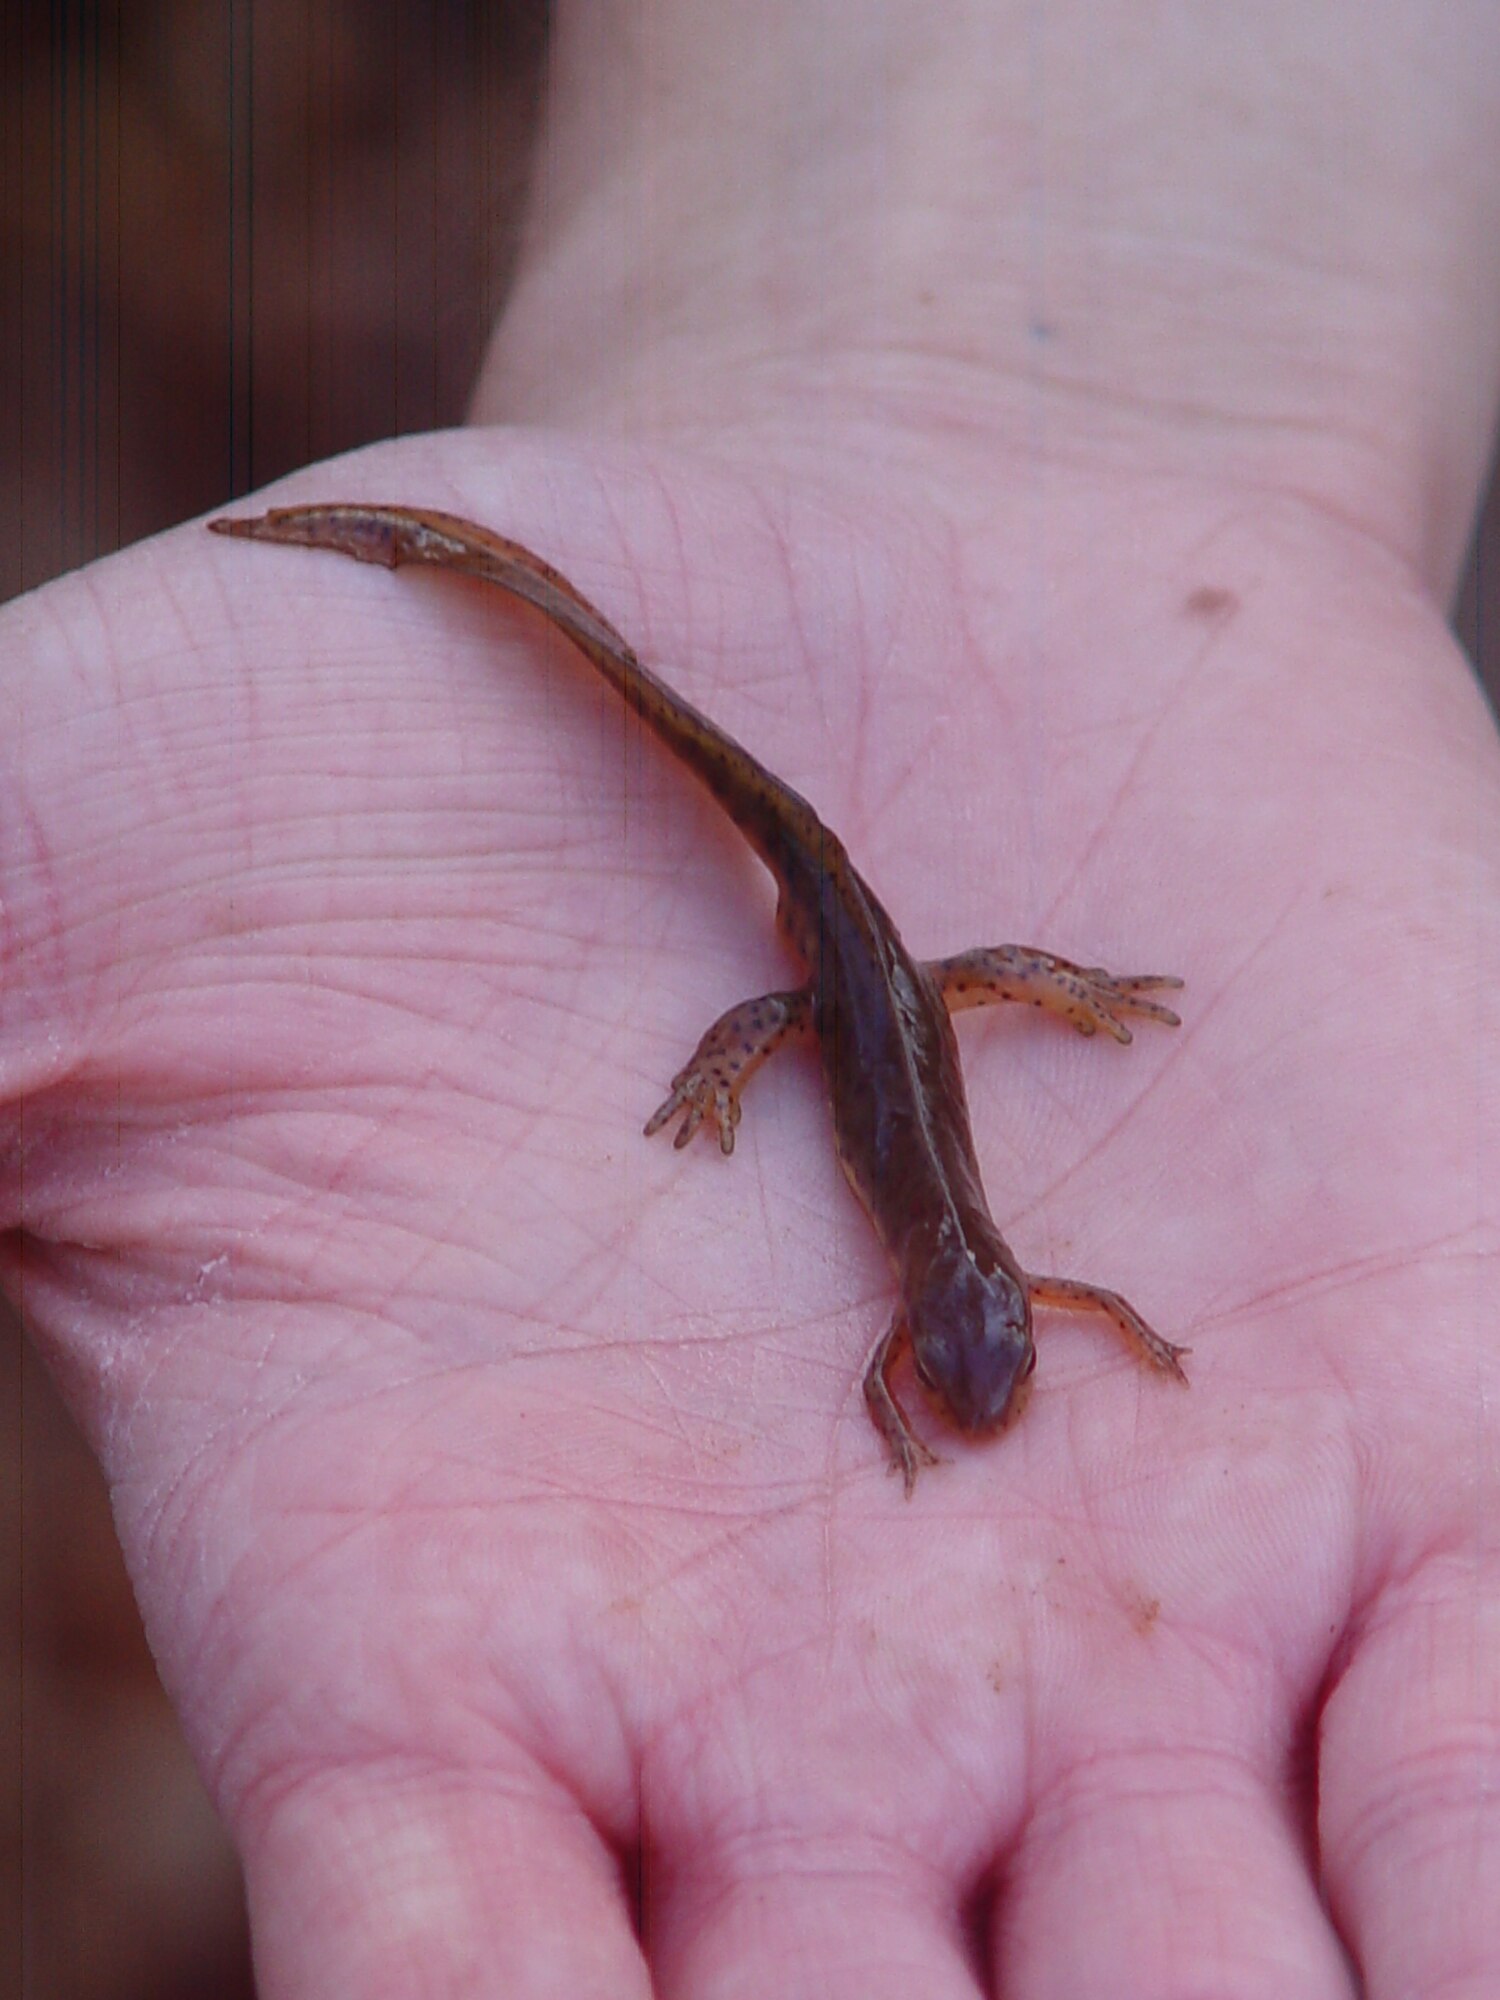 ATA Wildlife Ecologist Richie Wyckoff found this Eastern newt, a common salamander, predacious diving beetles (water beetle), two salamanders, a snake and a variety of plants to show base employees and members of the public during a walk as part of the base's Earth Day activities.  